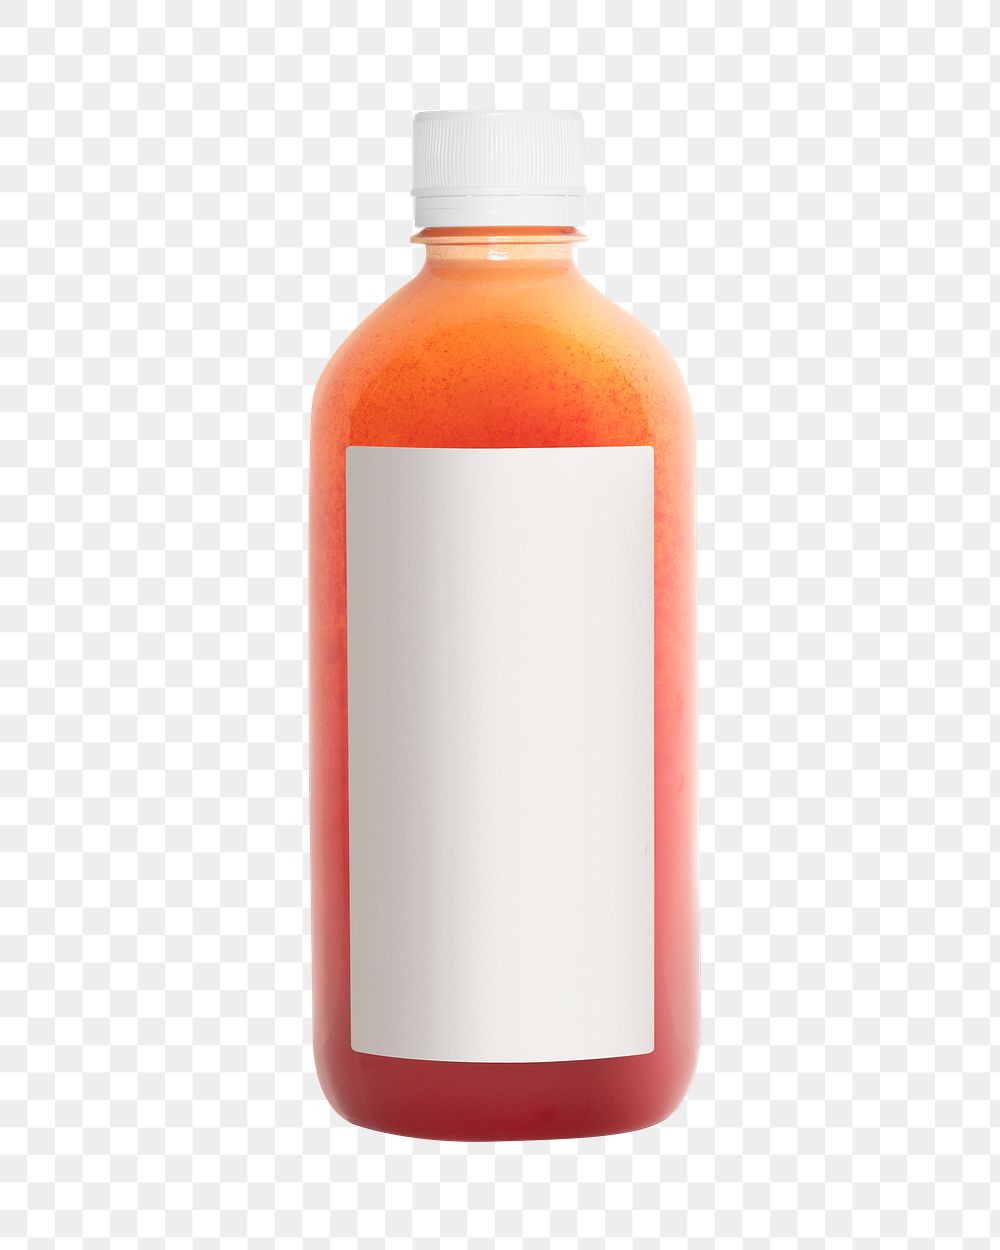 Fruit juice bottle png, transparent background and isolated object 